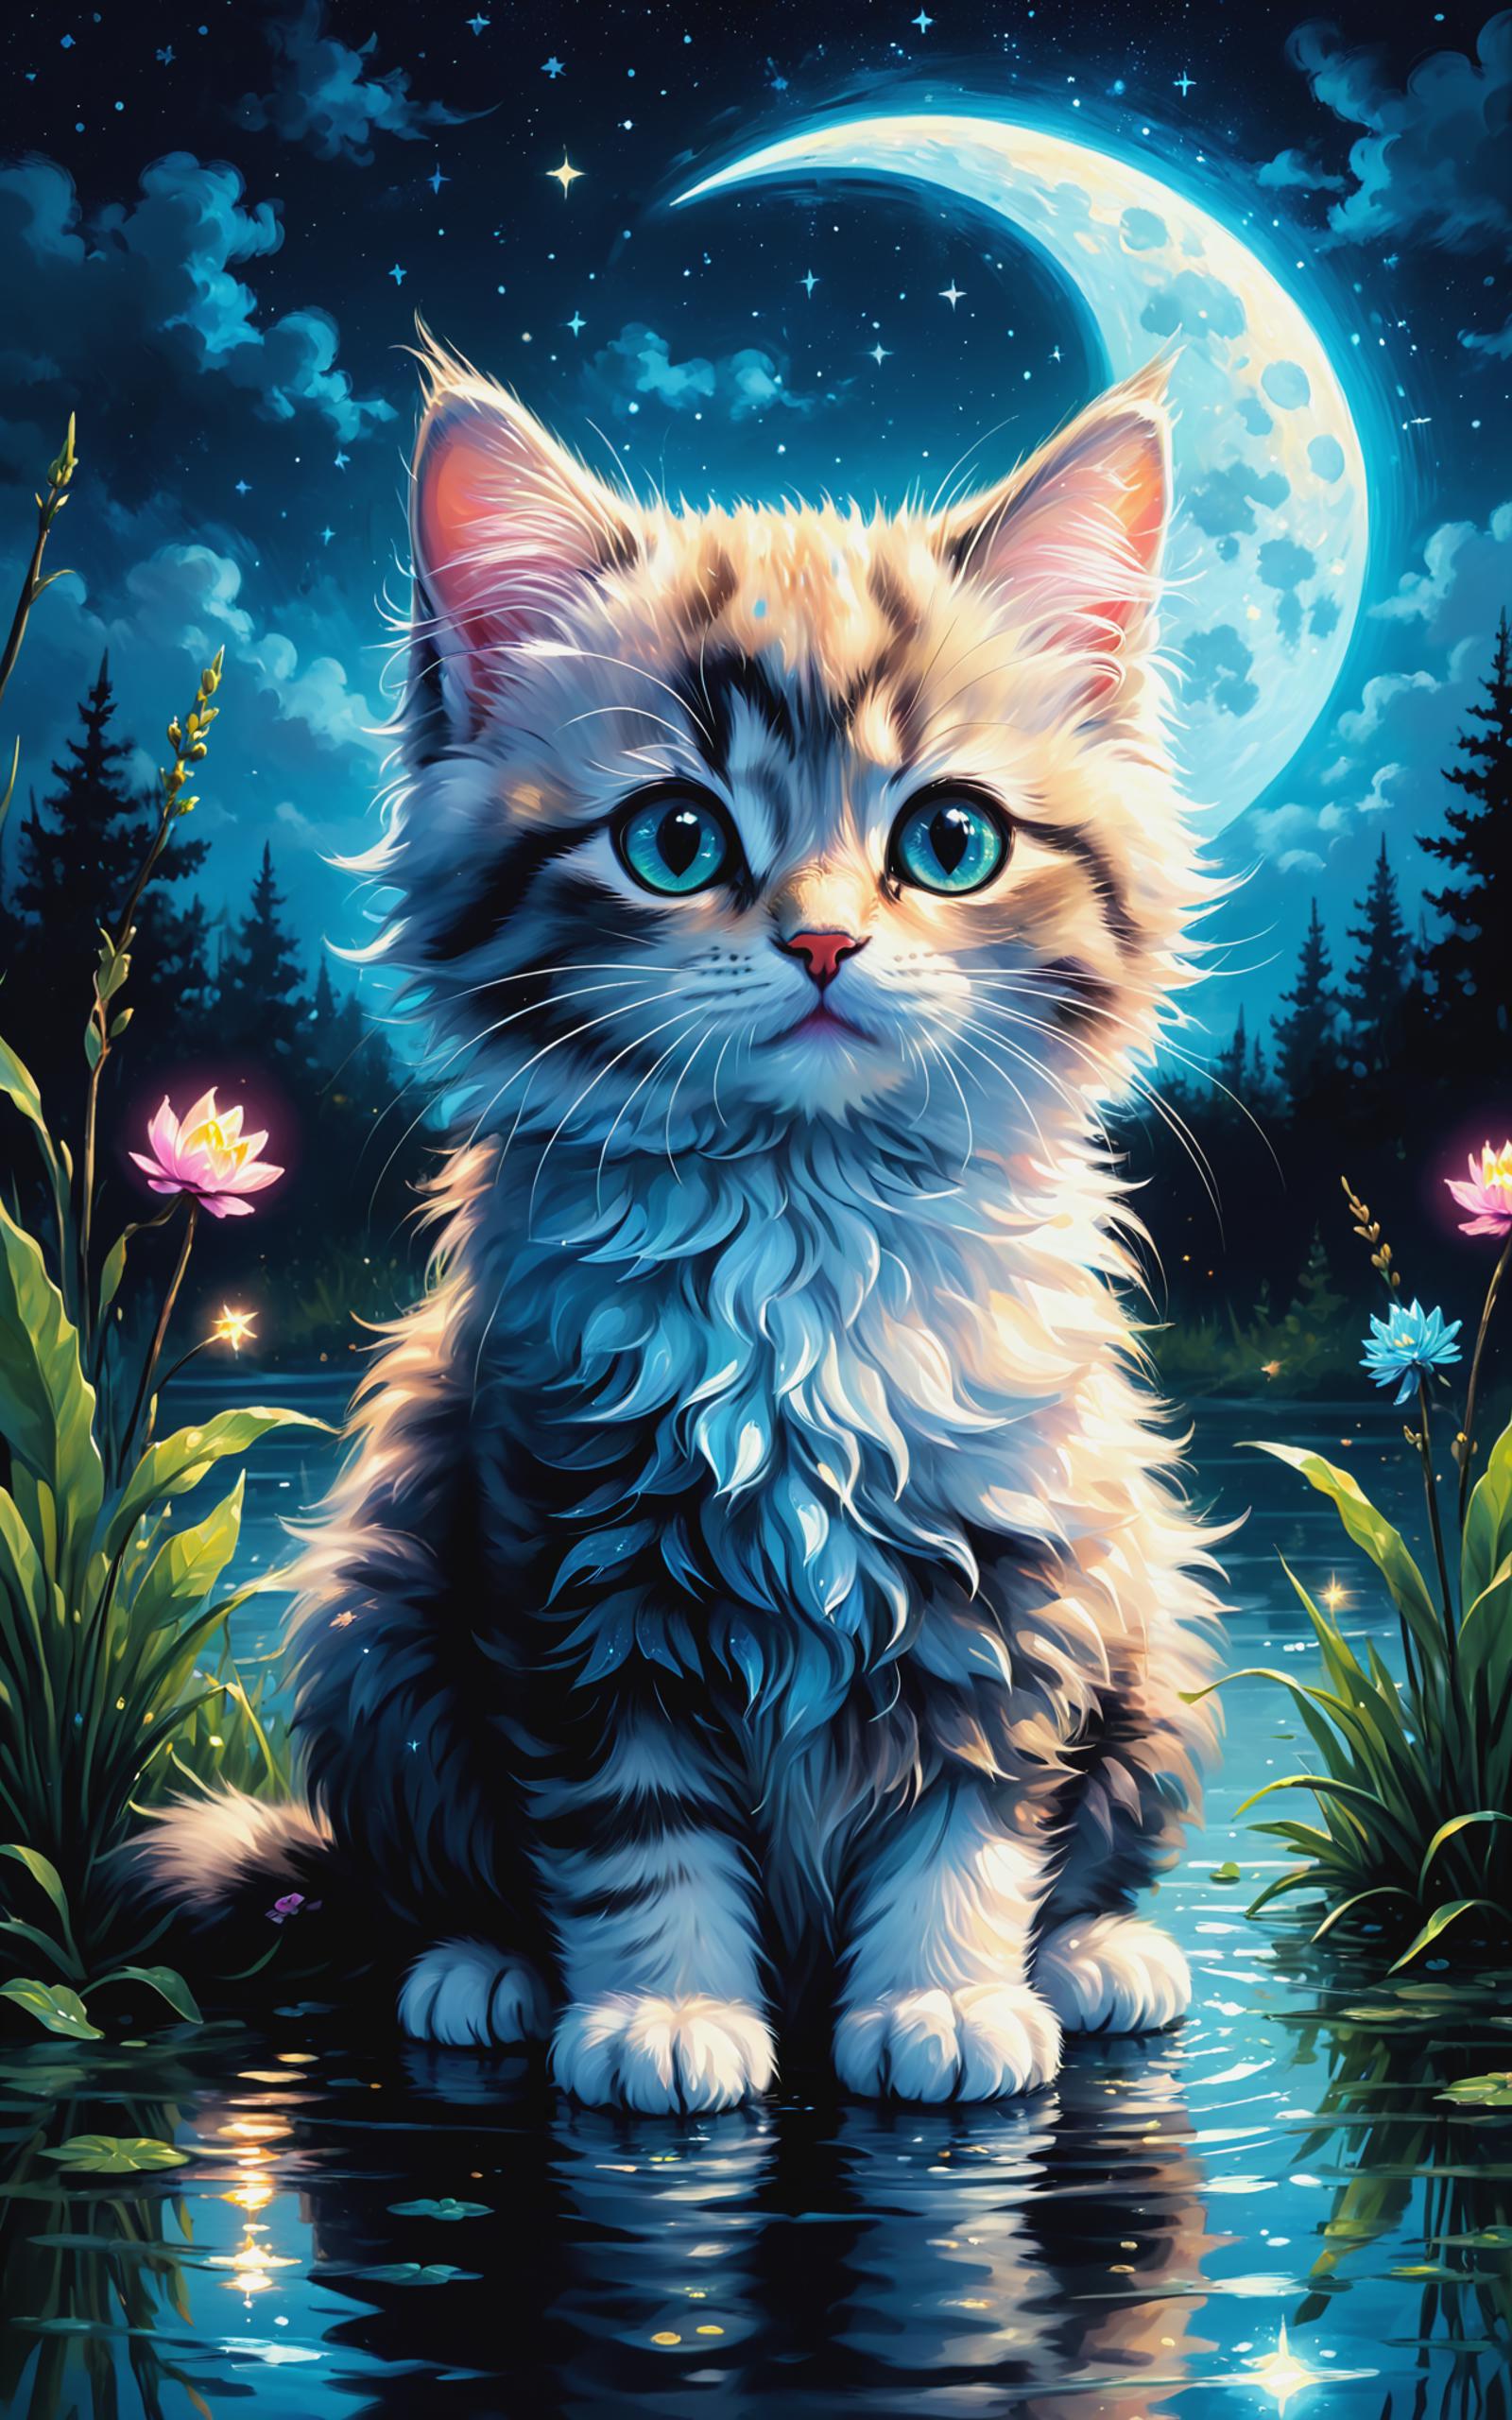 A Painting of a Cat with Blue Eyes and a Fluffy White Tail